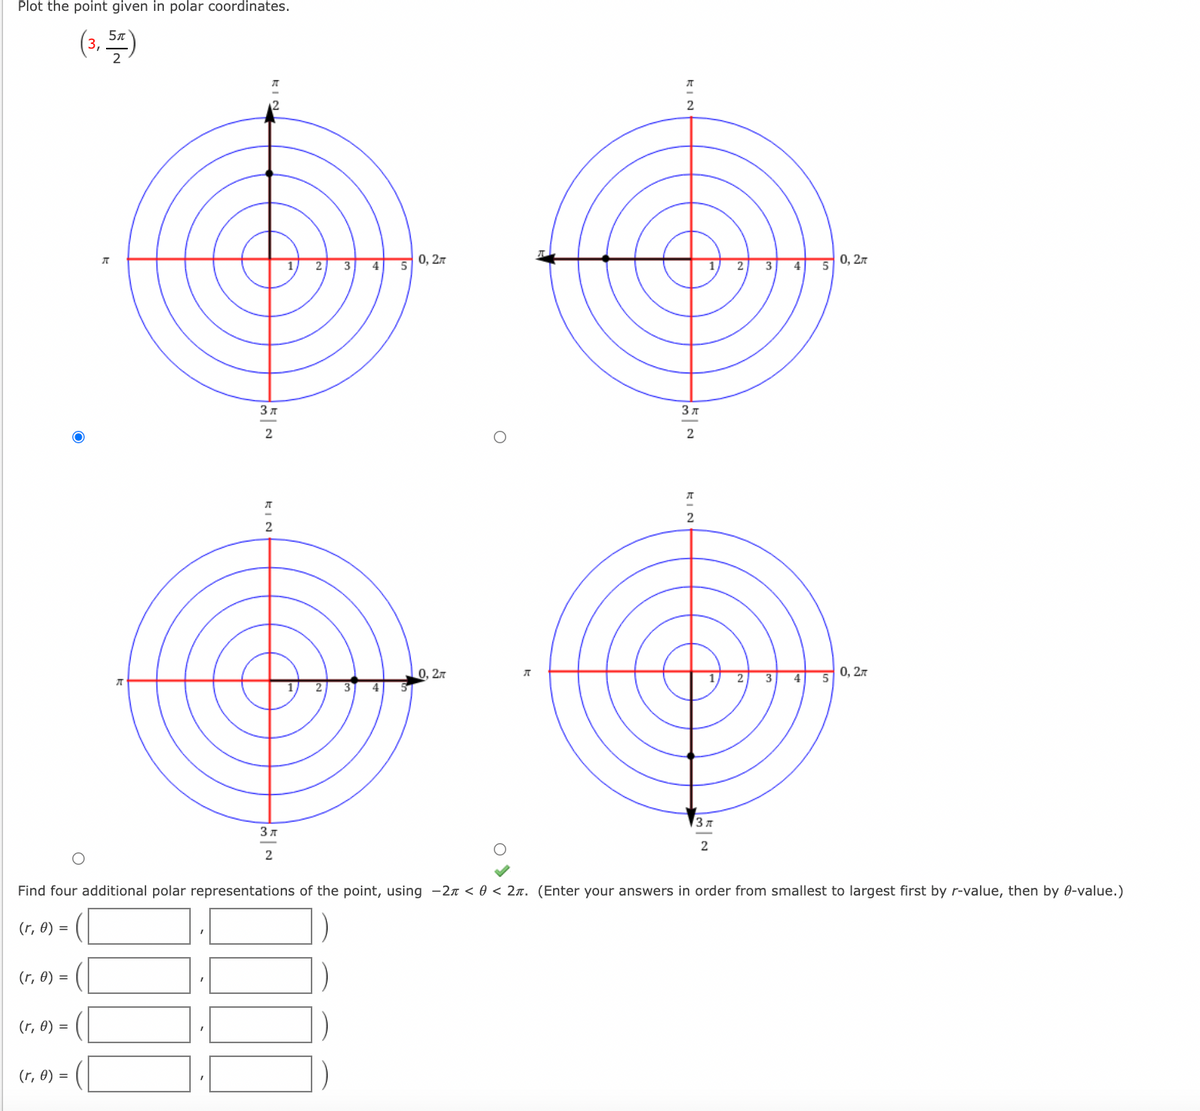 Plot the point given in polar coordinates.
(3. )
5л
0, 27
0, 2л
4
3
4
3 7
0,2л
2
3
4
0, 2л
3 7
3 7
Find four additional polar representations of the point, using -27 < 0 < 2n. (Enter your answers in order from smallest to largest first by r-value, then by 0-value.)
(r, 0) =
(r, 0) =
(r, 0) =
(r, 0) =
EIN
